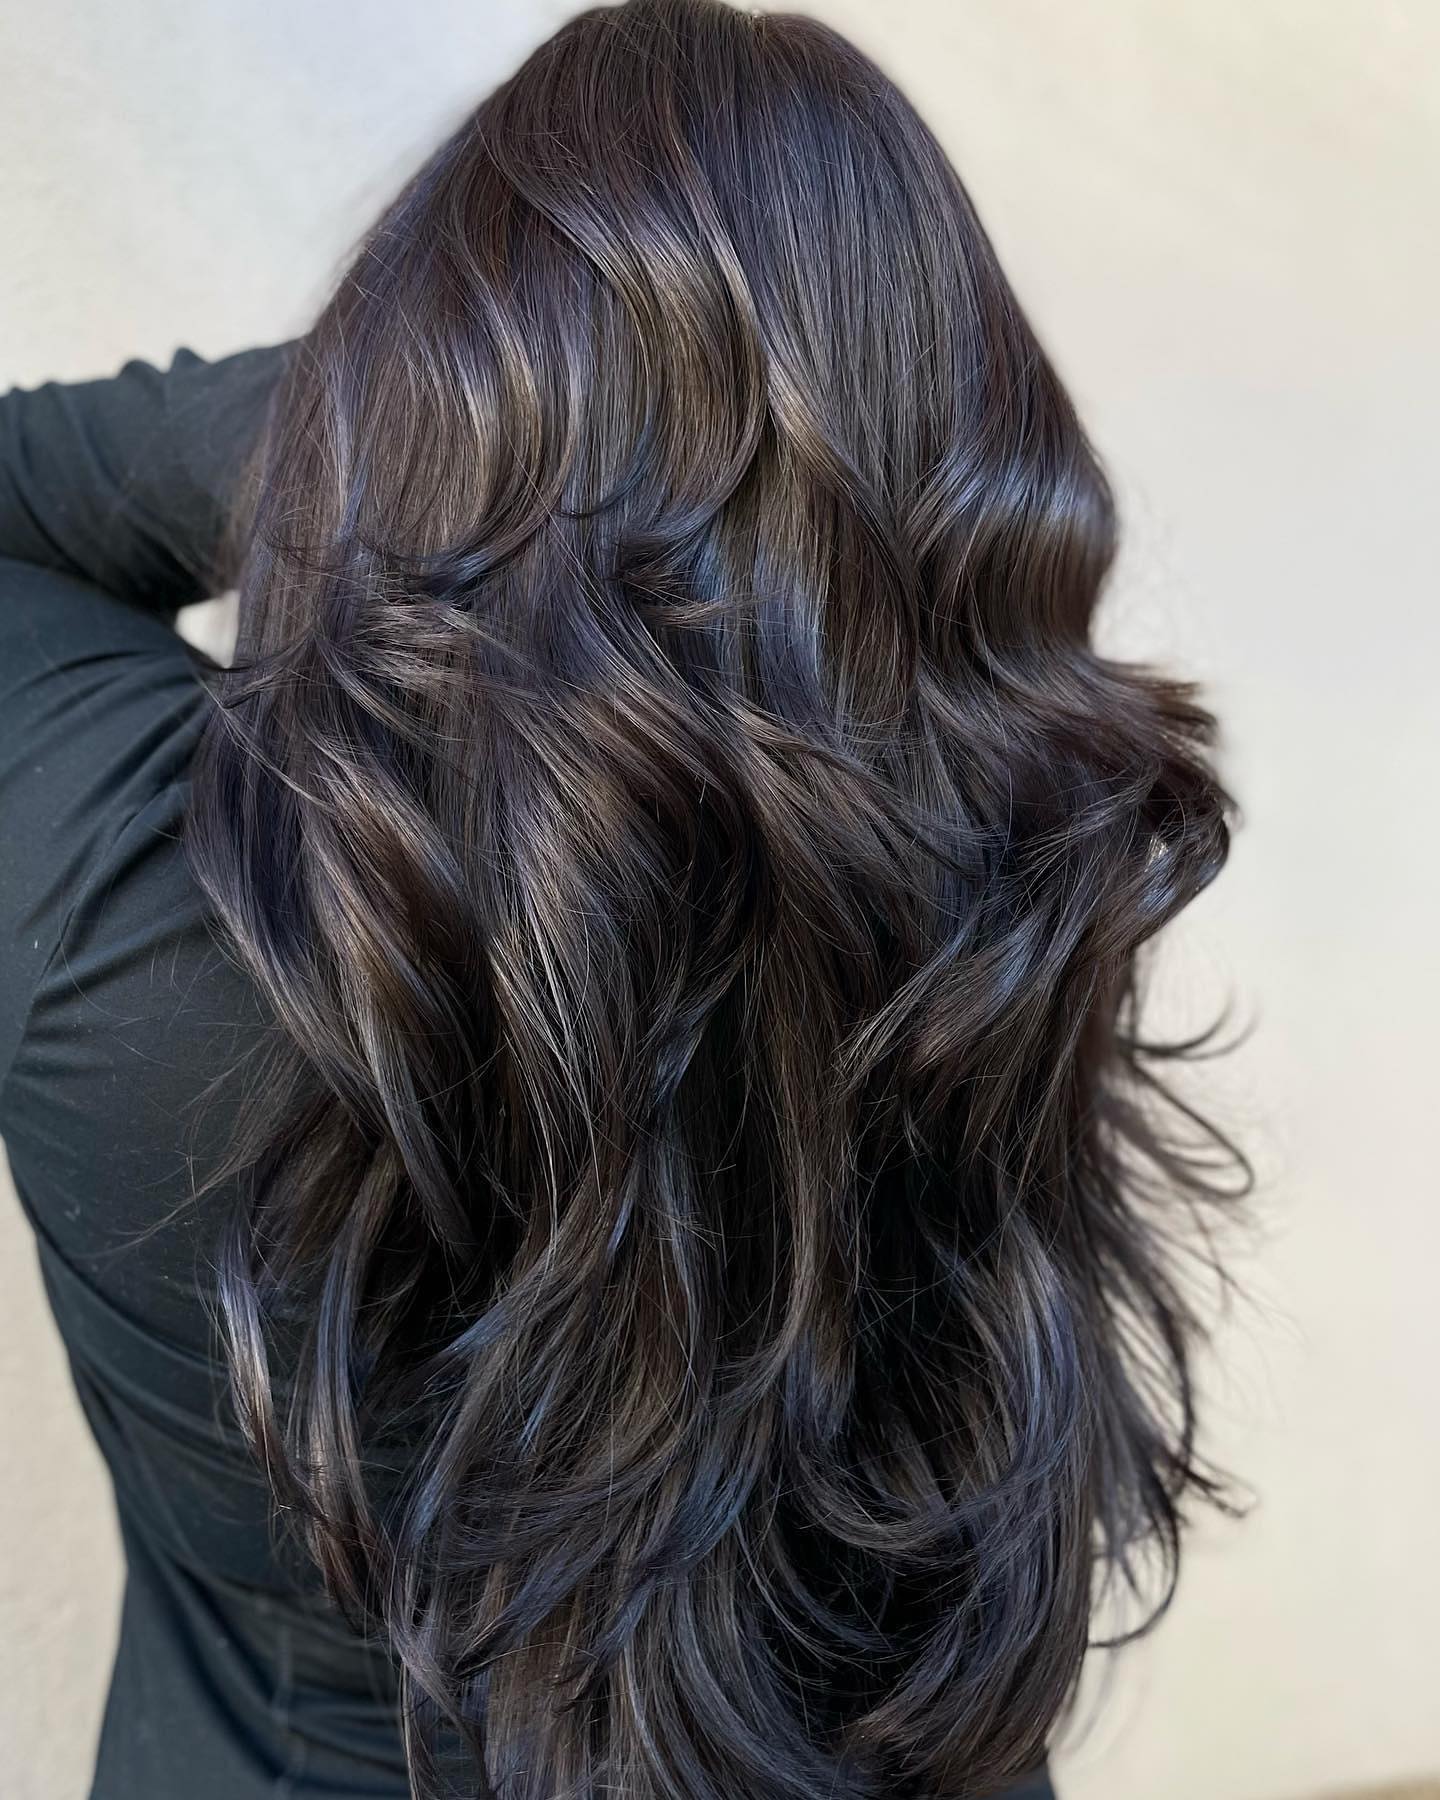 Long Dark Hair with Blue and Gray Highlights